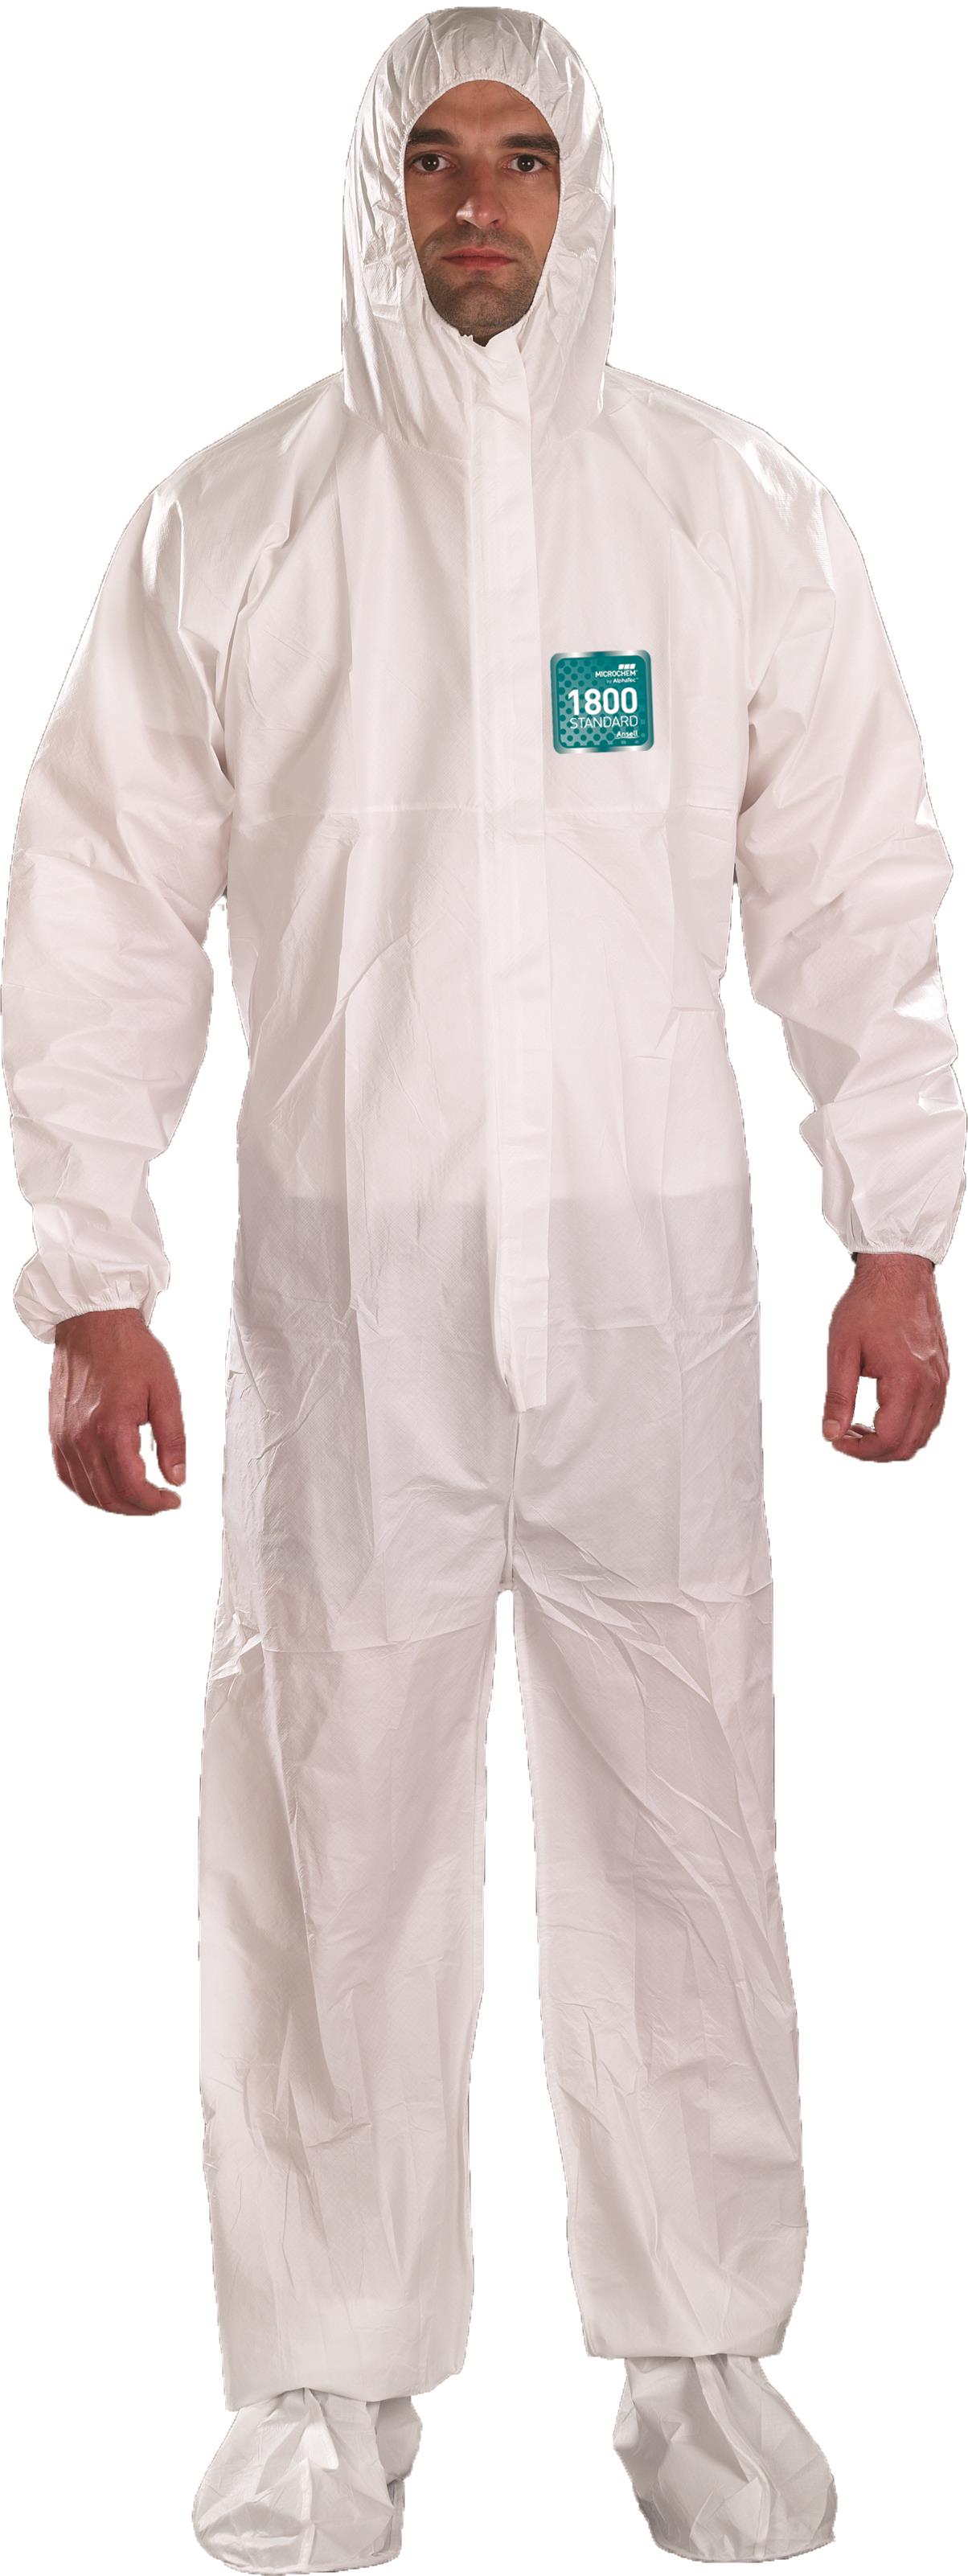 MICROCHEM 1800 HOODED BOOTED COVERALL